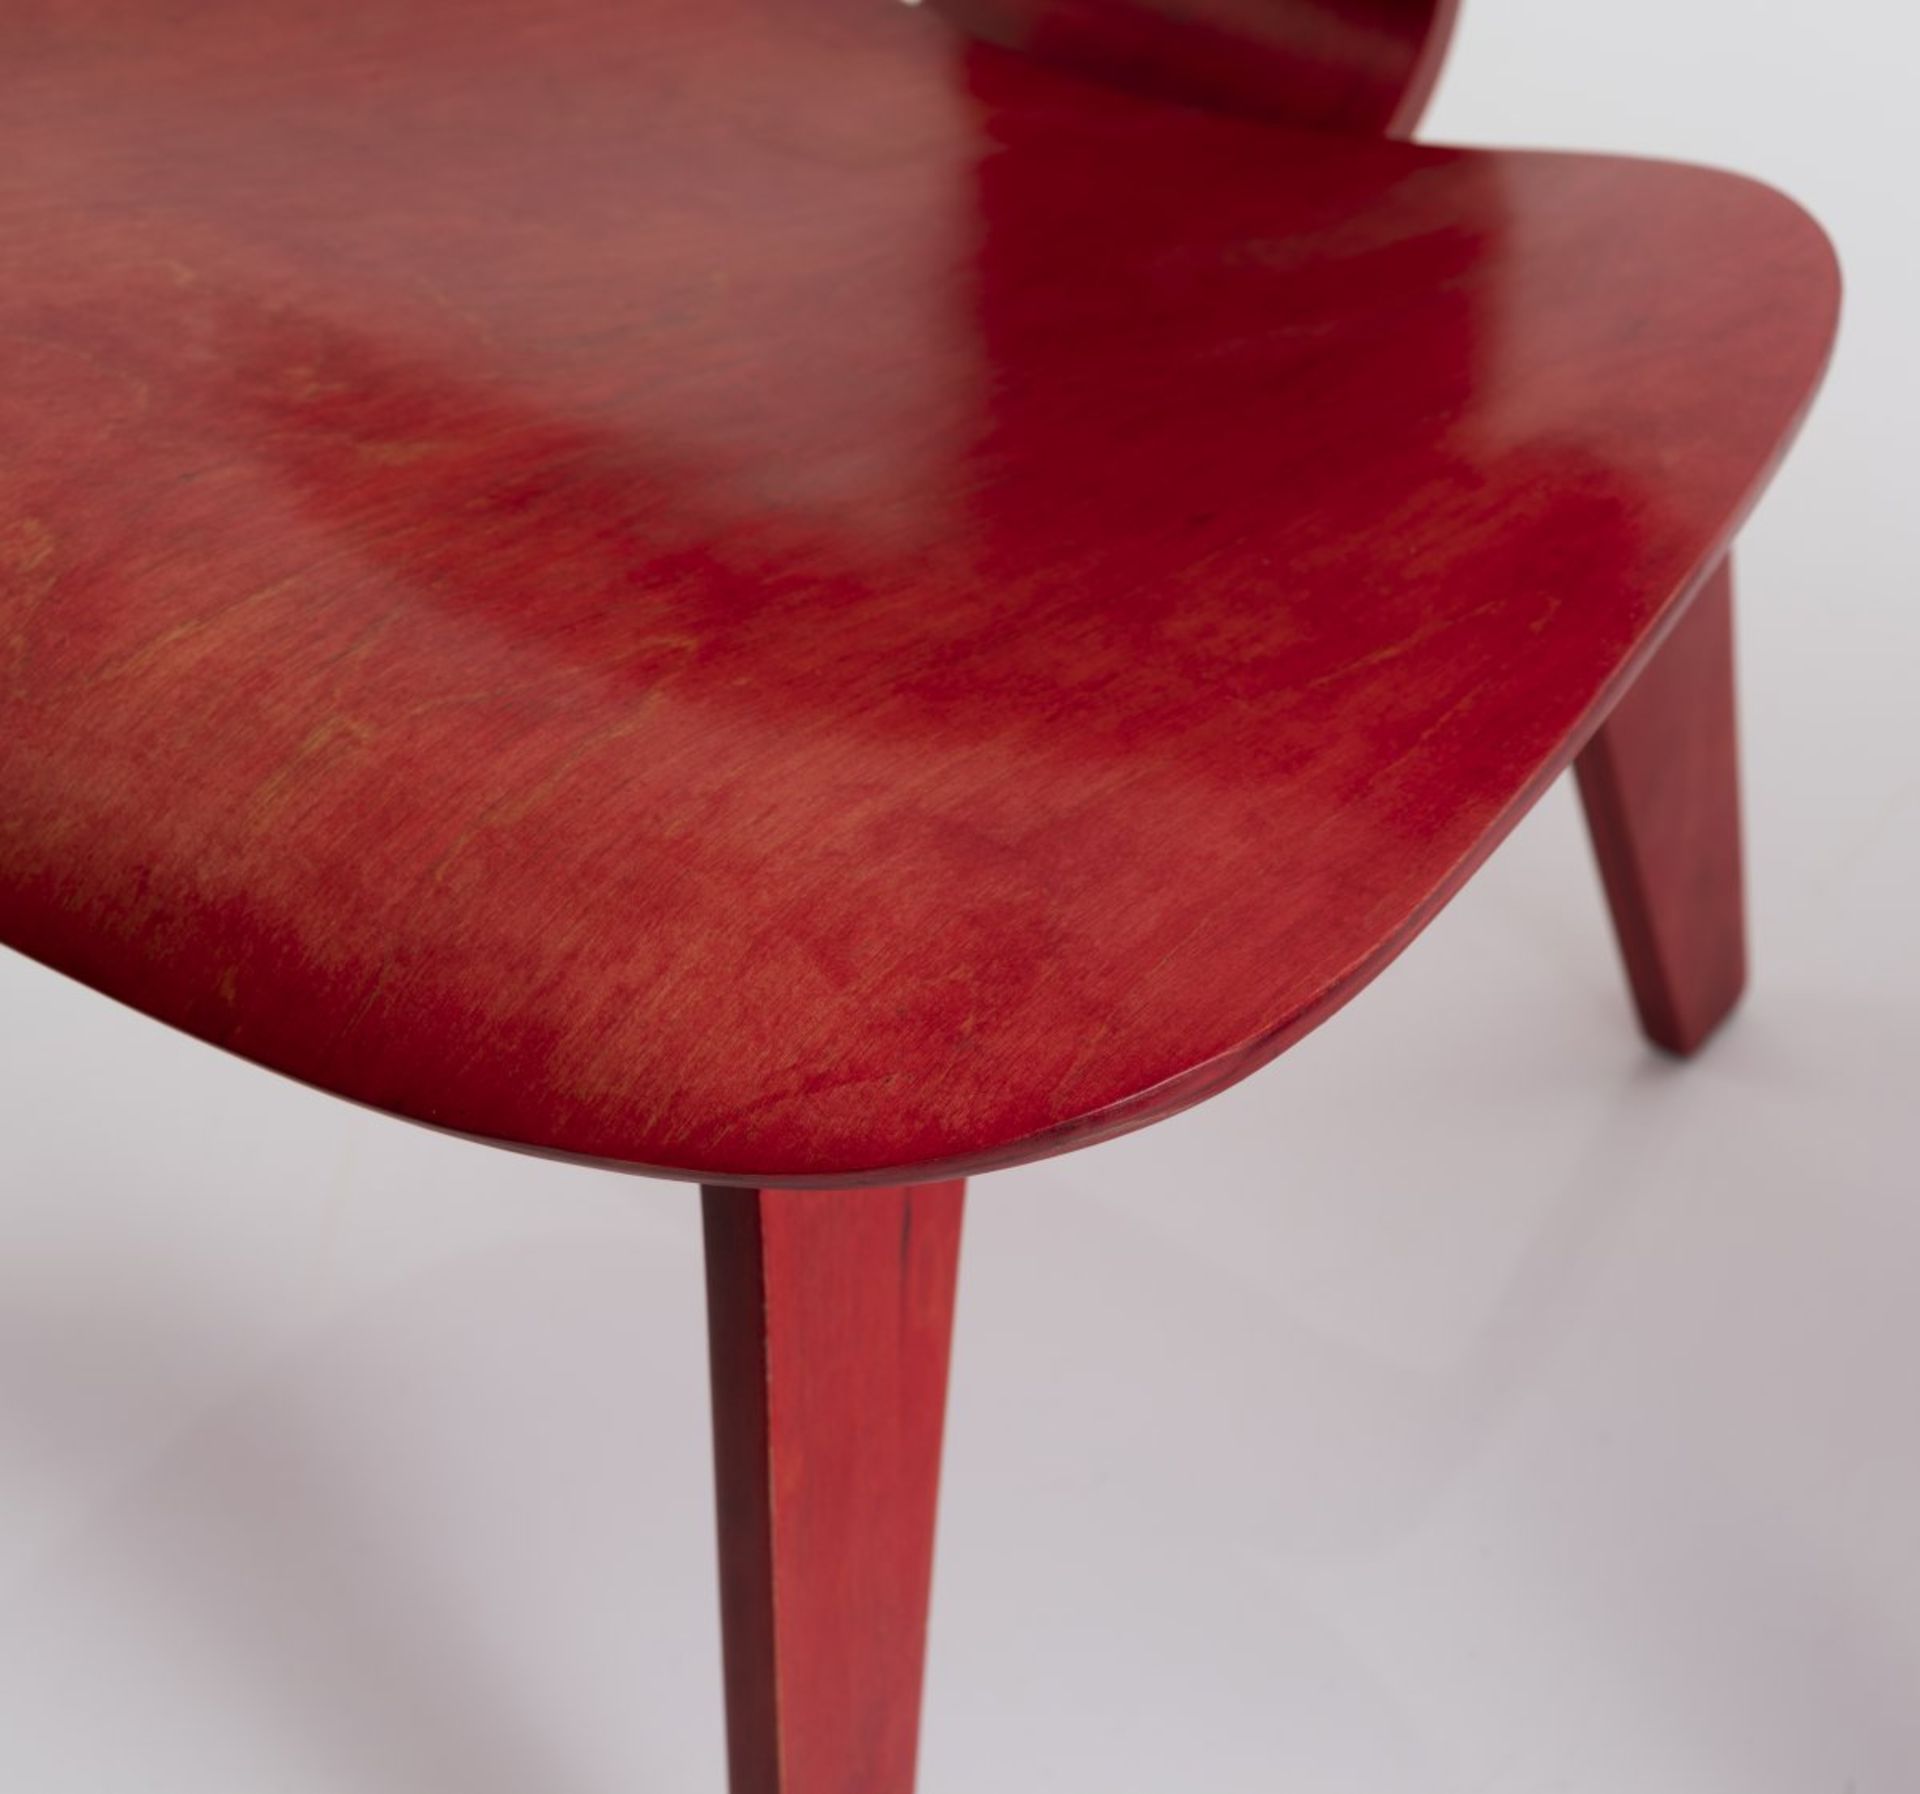 Charles Eames, Zwei Sessel 'LCW - Lounge Chair Wood', 1945/46Zwei Sessel 'LCW - Lounge Chair - Image 5 of 7